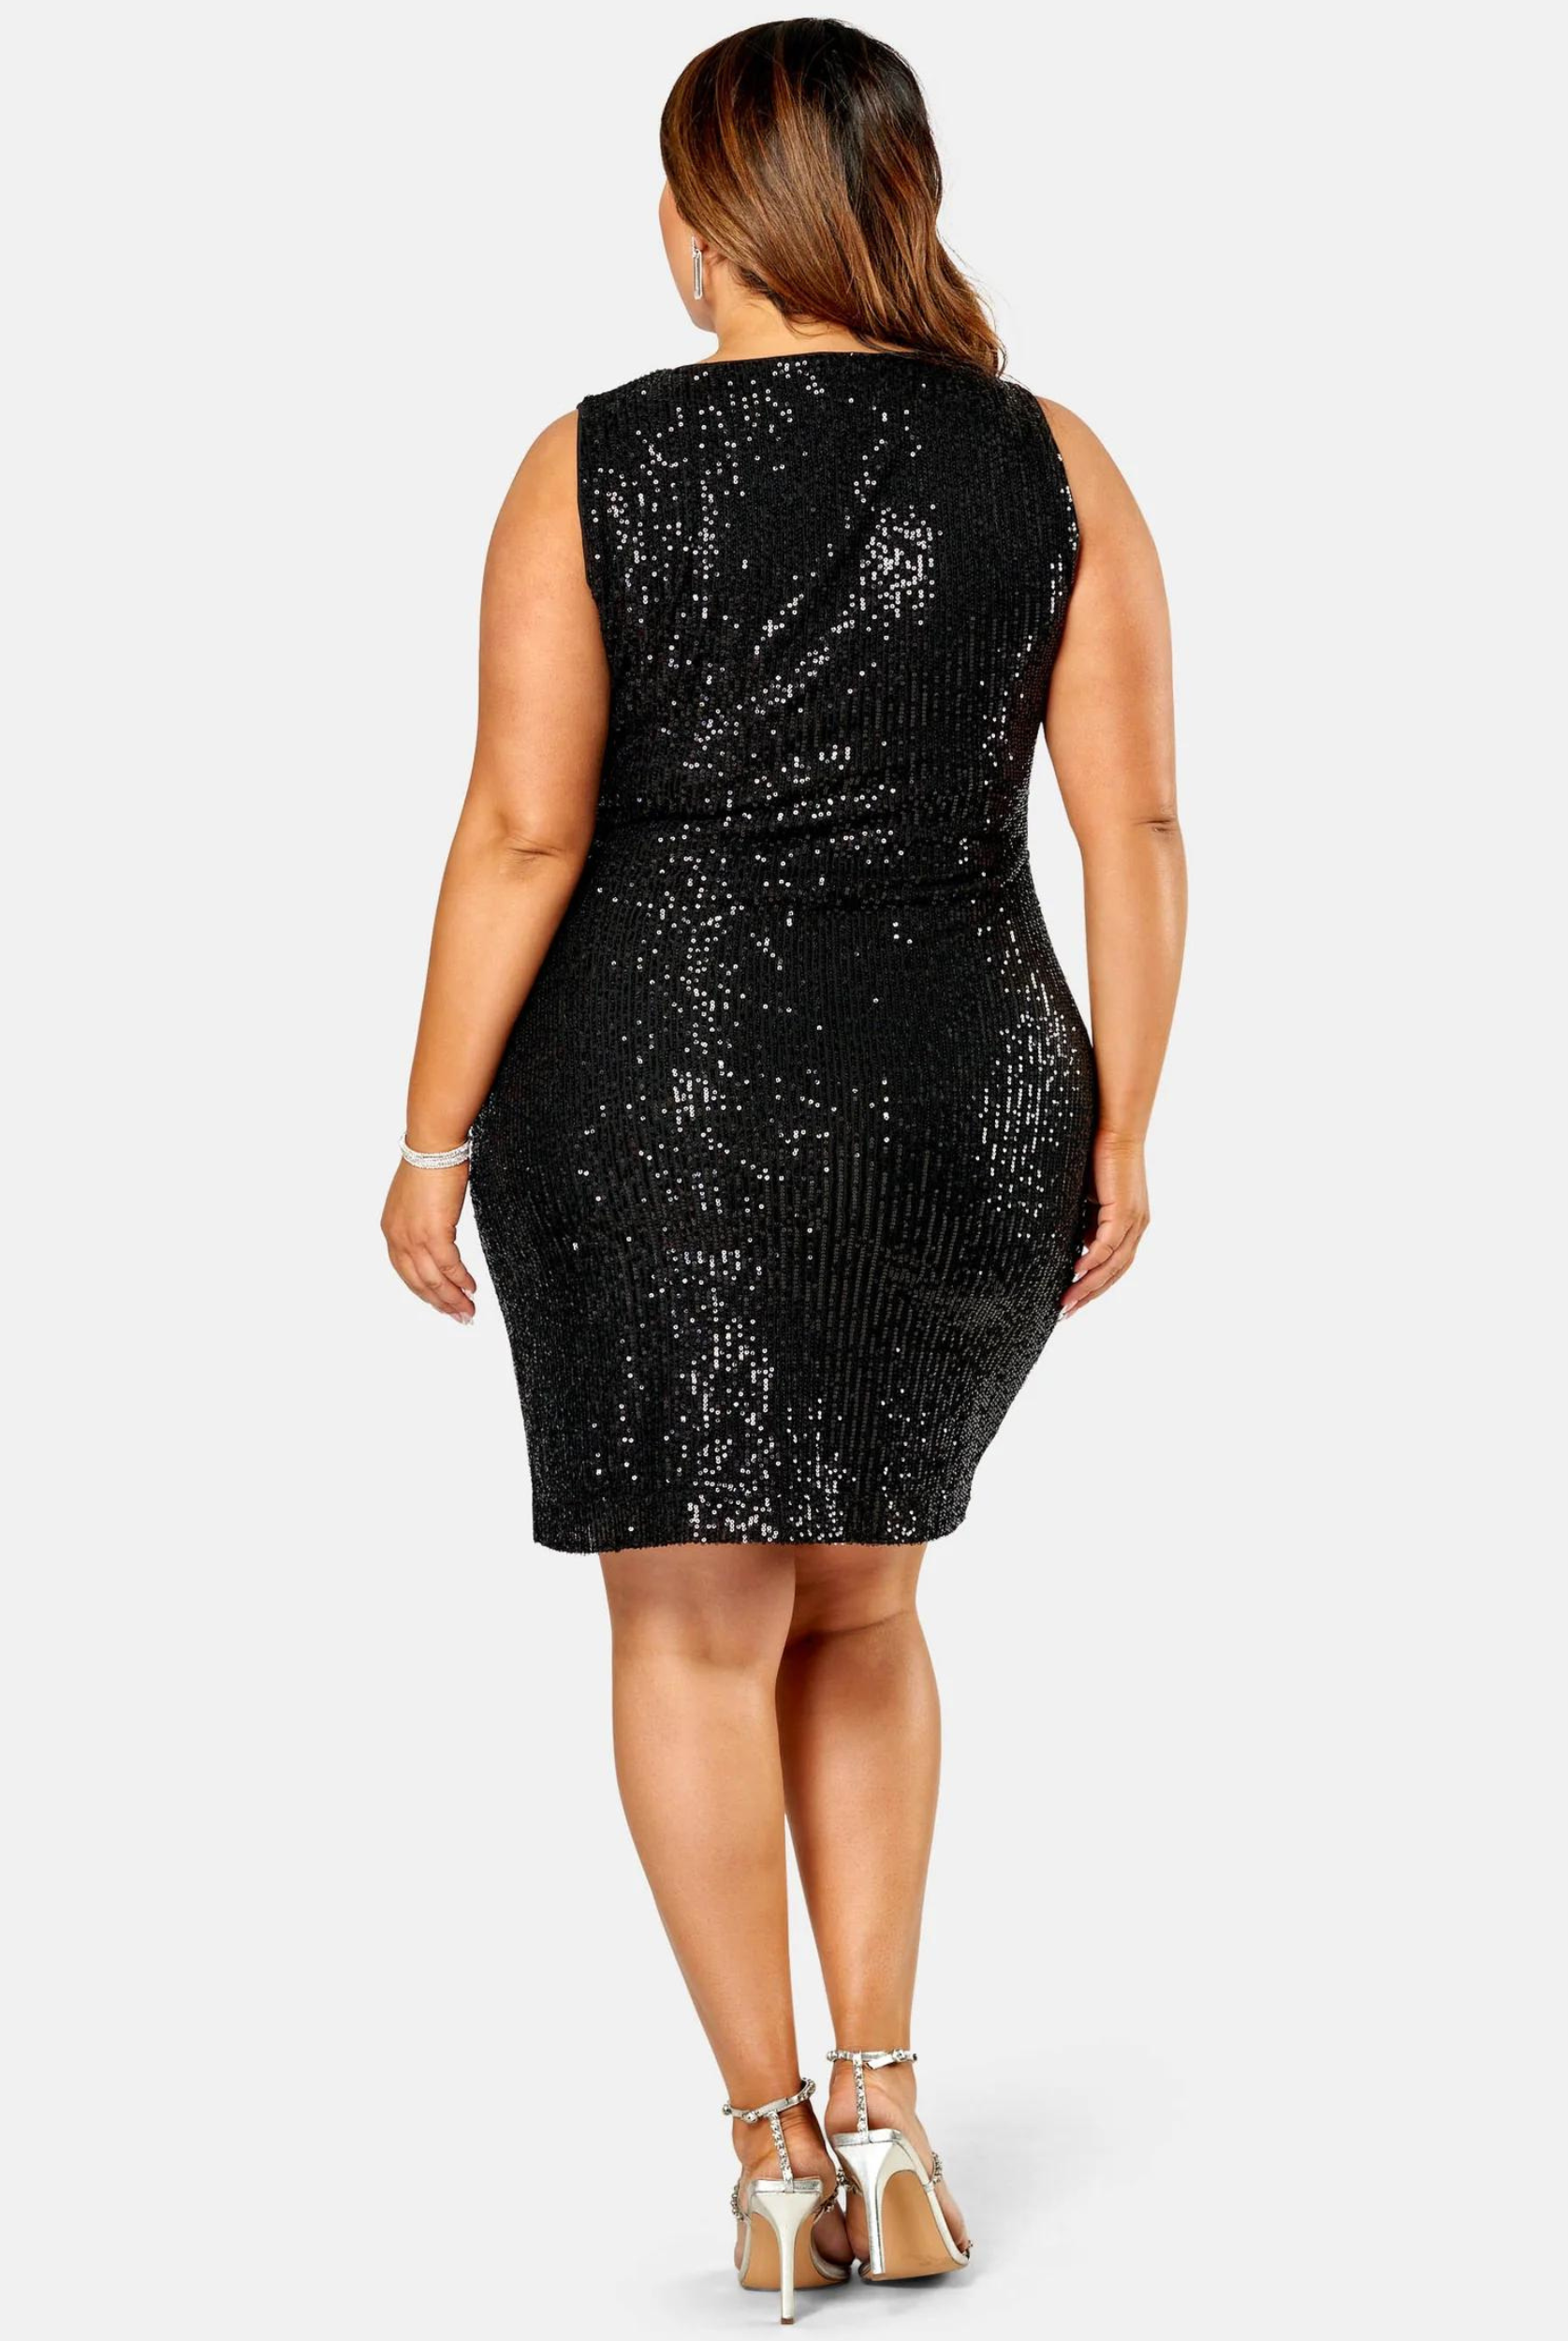 Curve woman wearing a sequin mini dress with wrap front detail